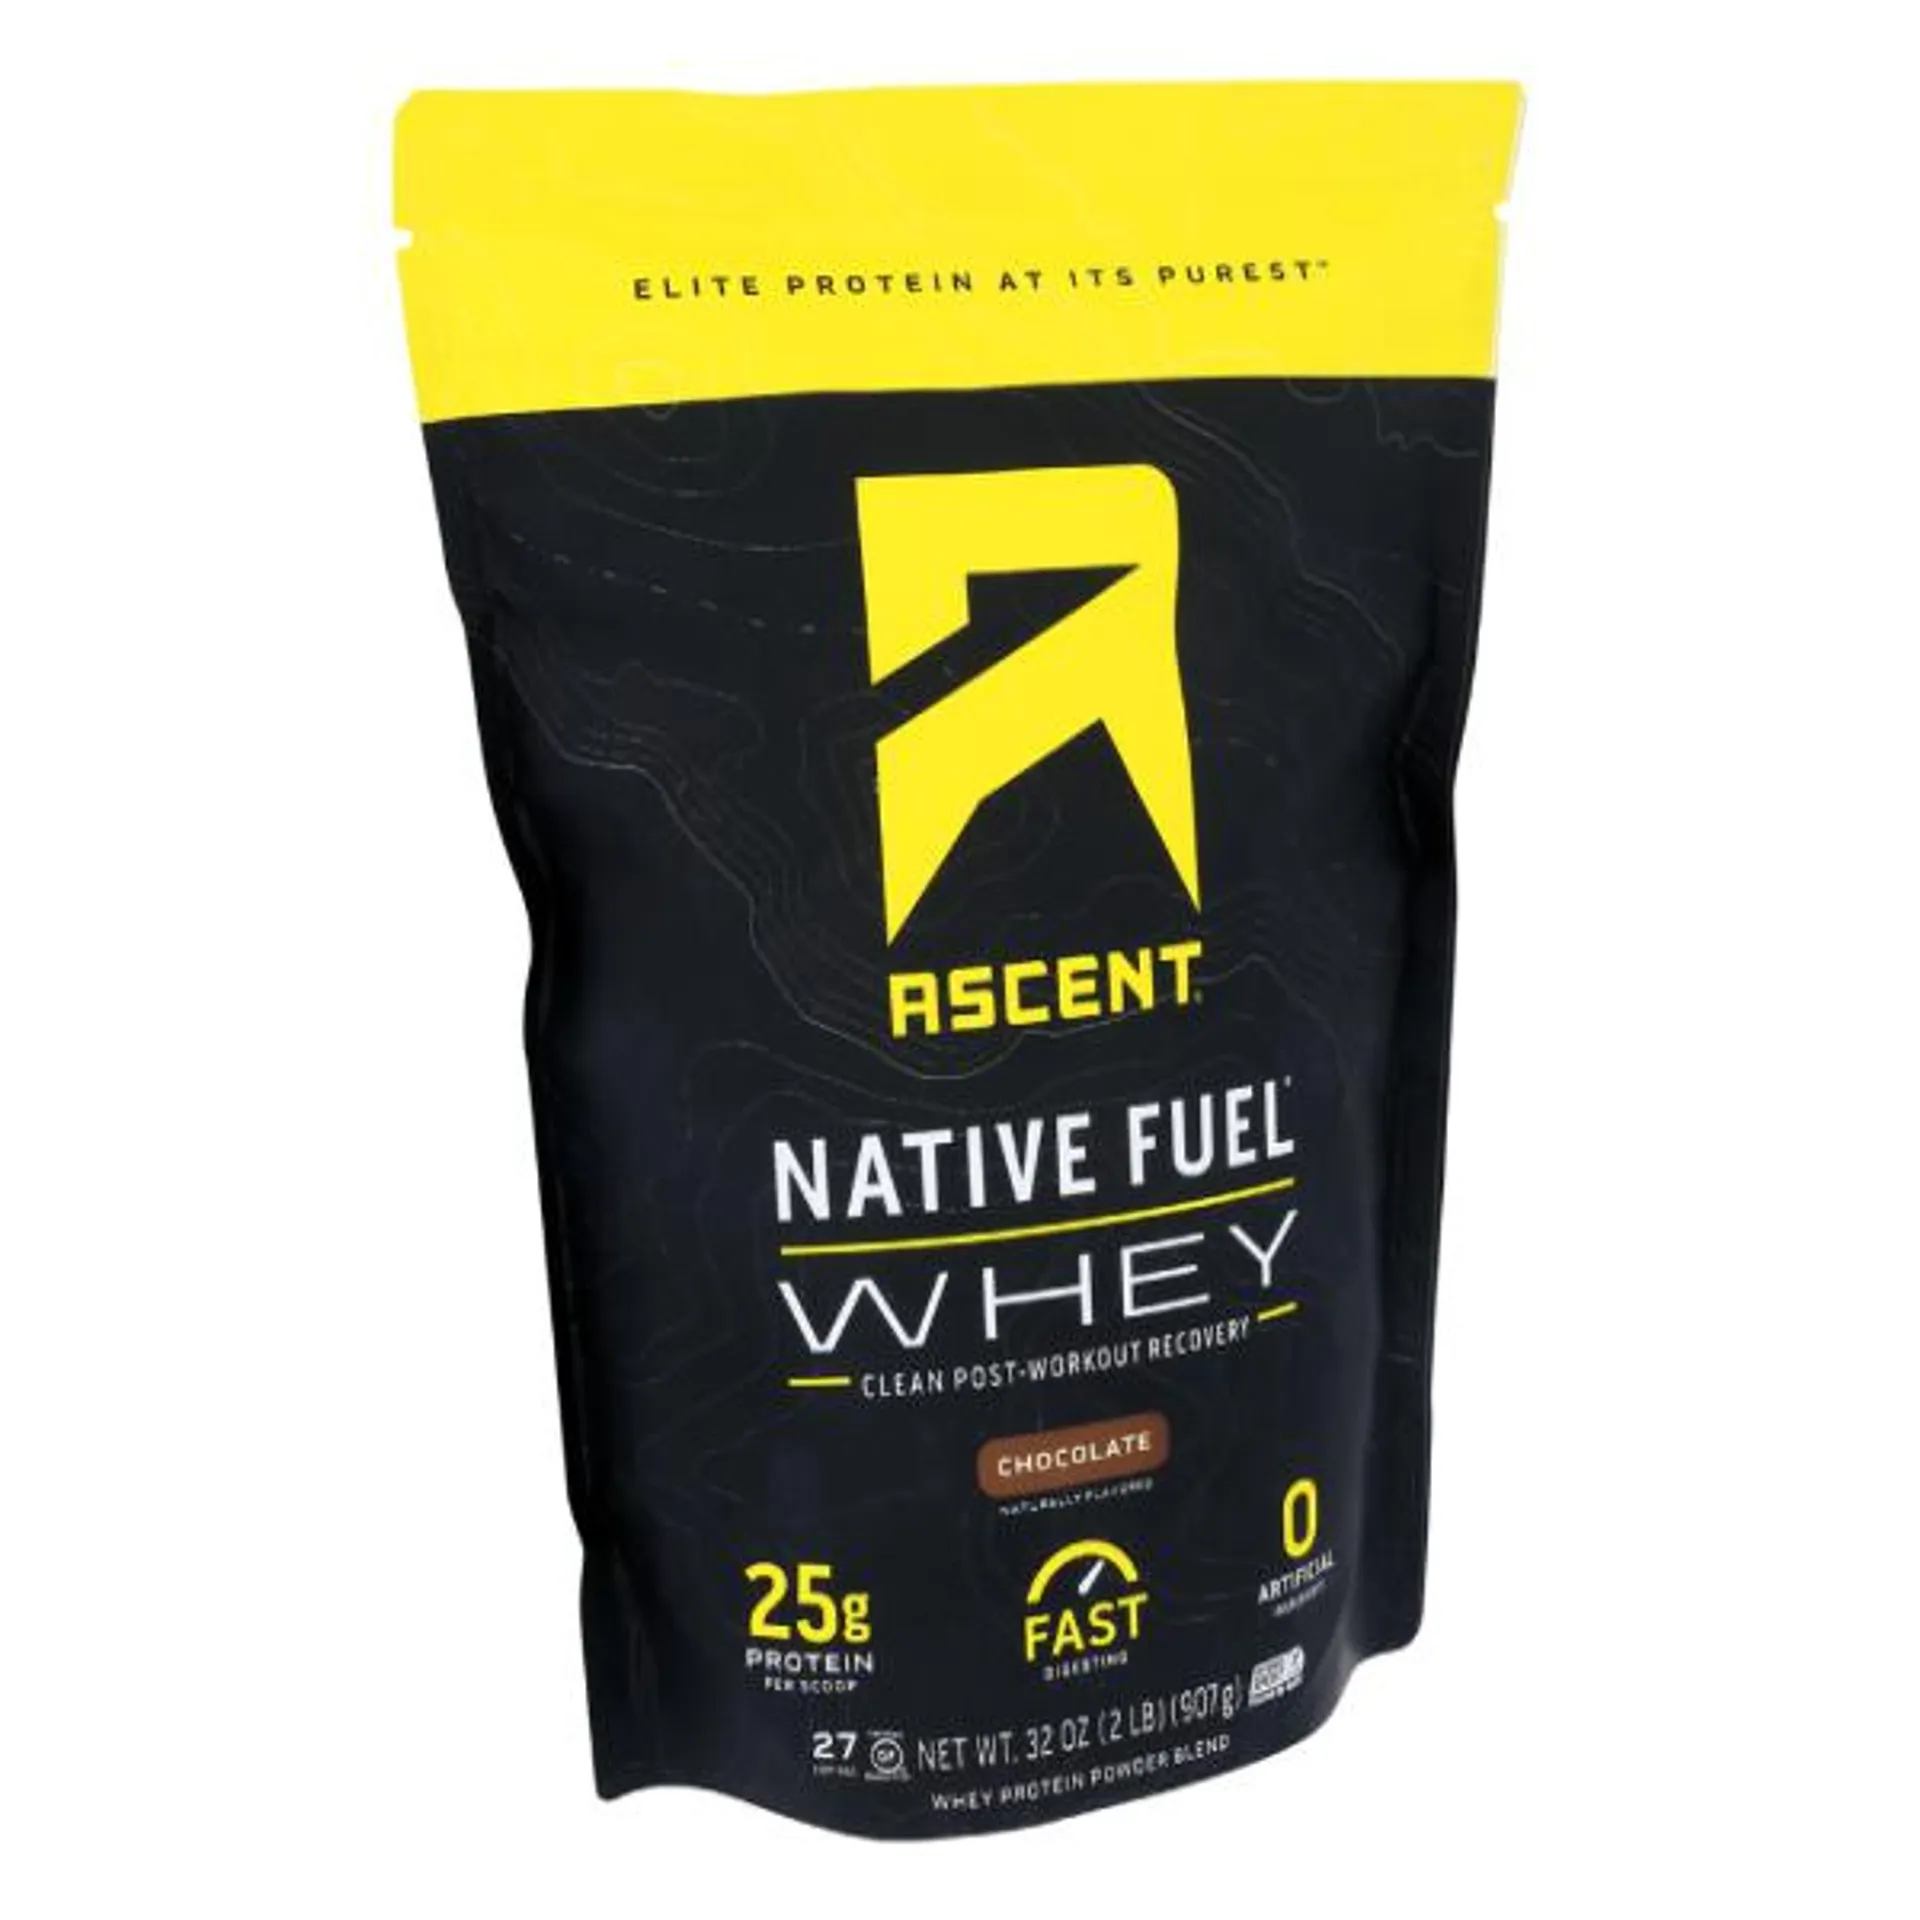 Ascent Native Fuel Whey Protein Chocolate - 2 Pound